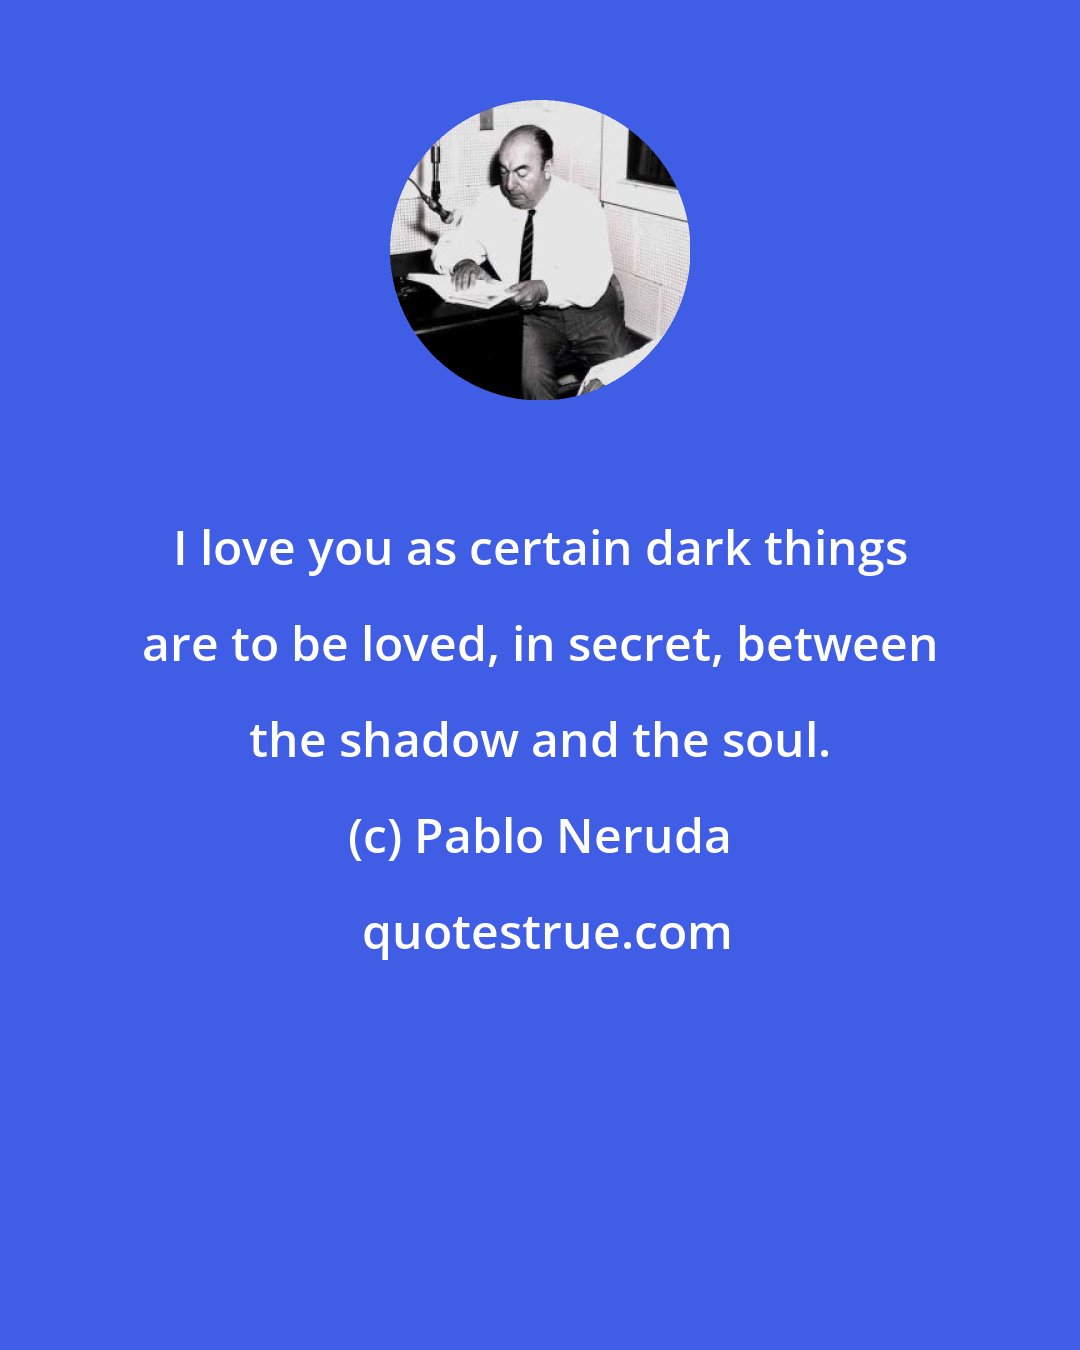 Pablo Neruda: I love you as certain dark things are to be loved, in secret, between the shadow and the soul.